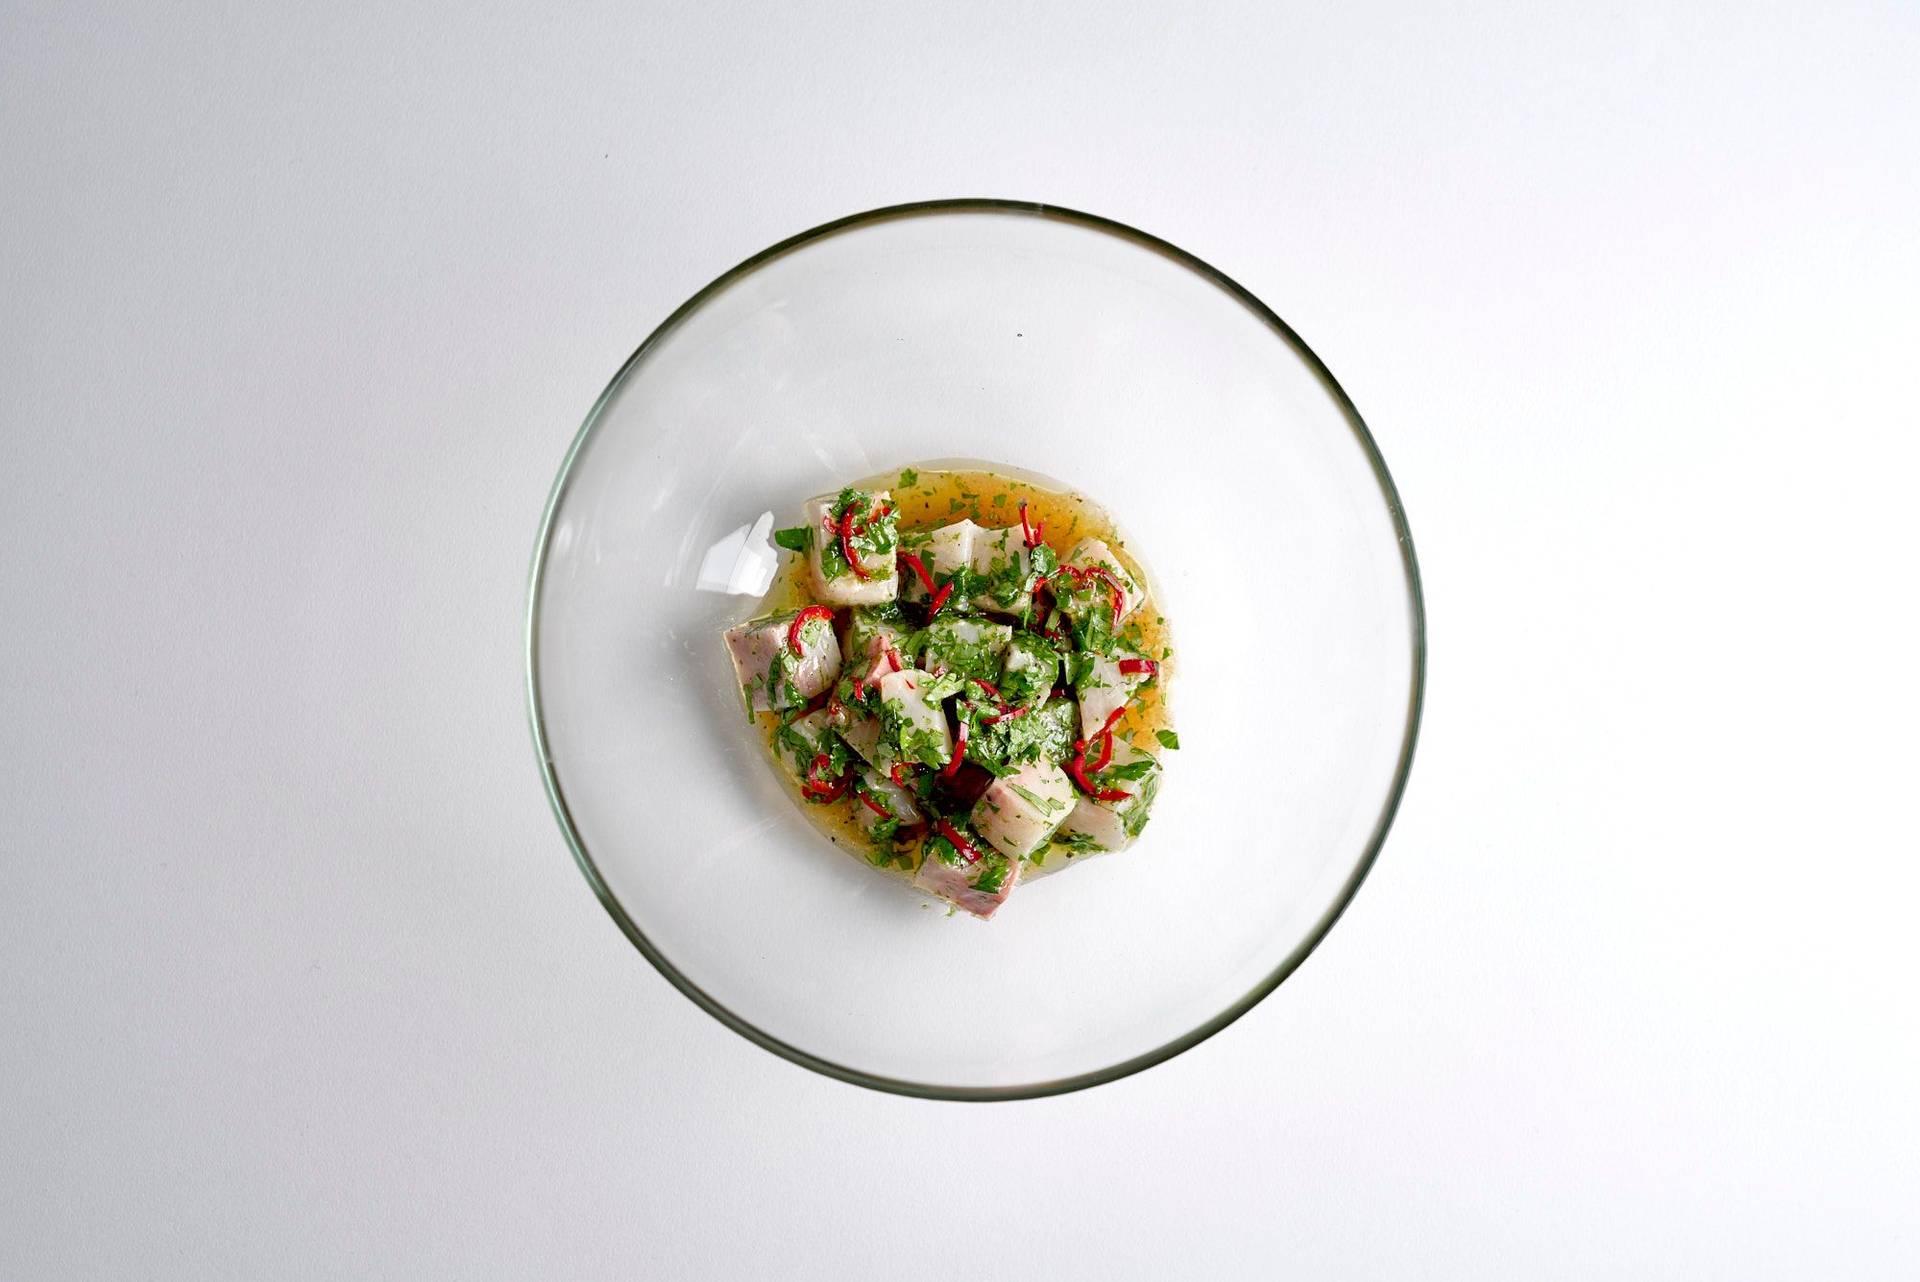 kingfish ceviche in a glass bowl on white background